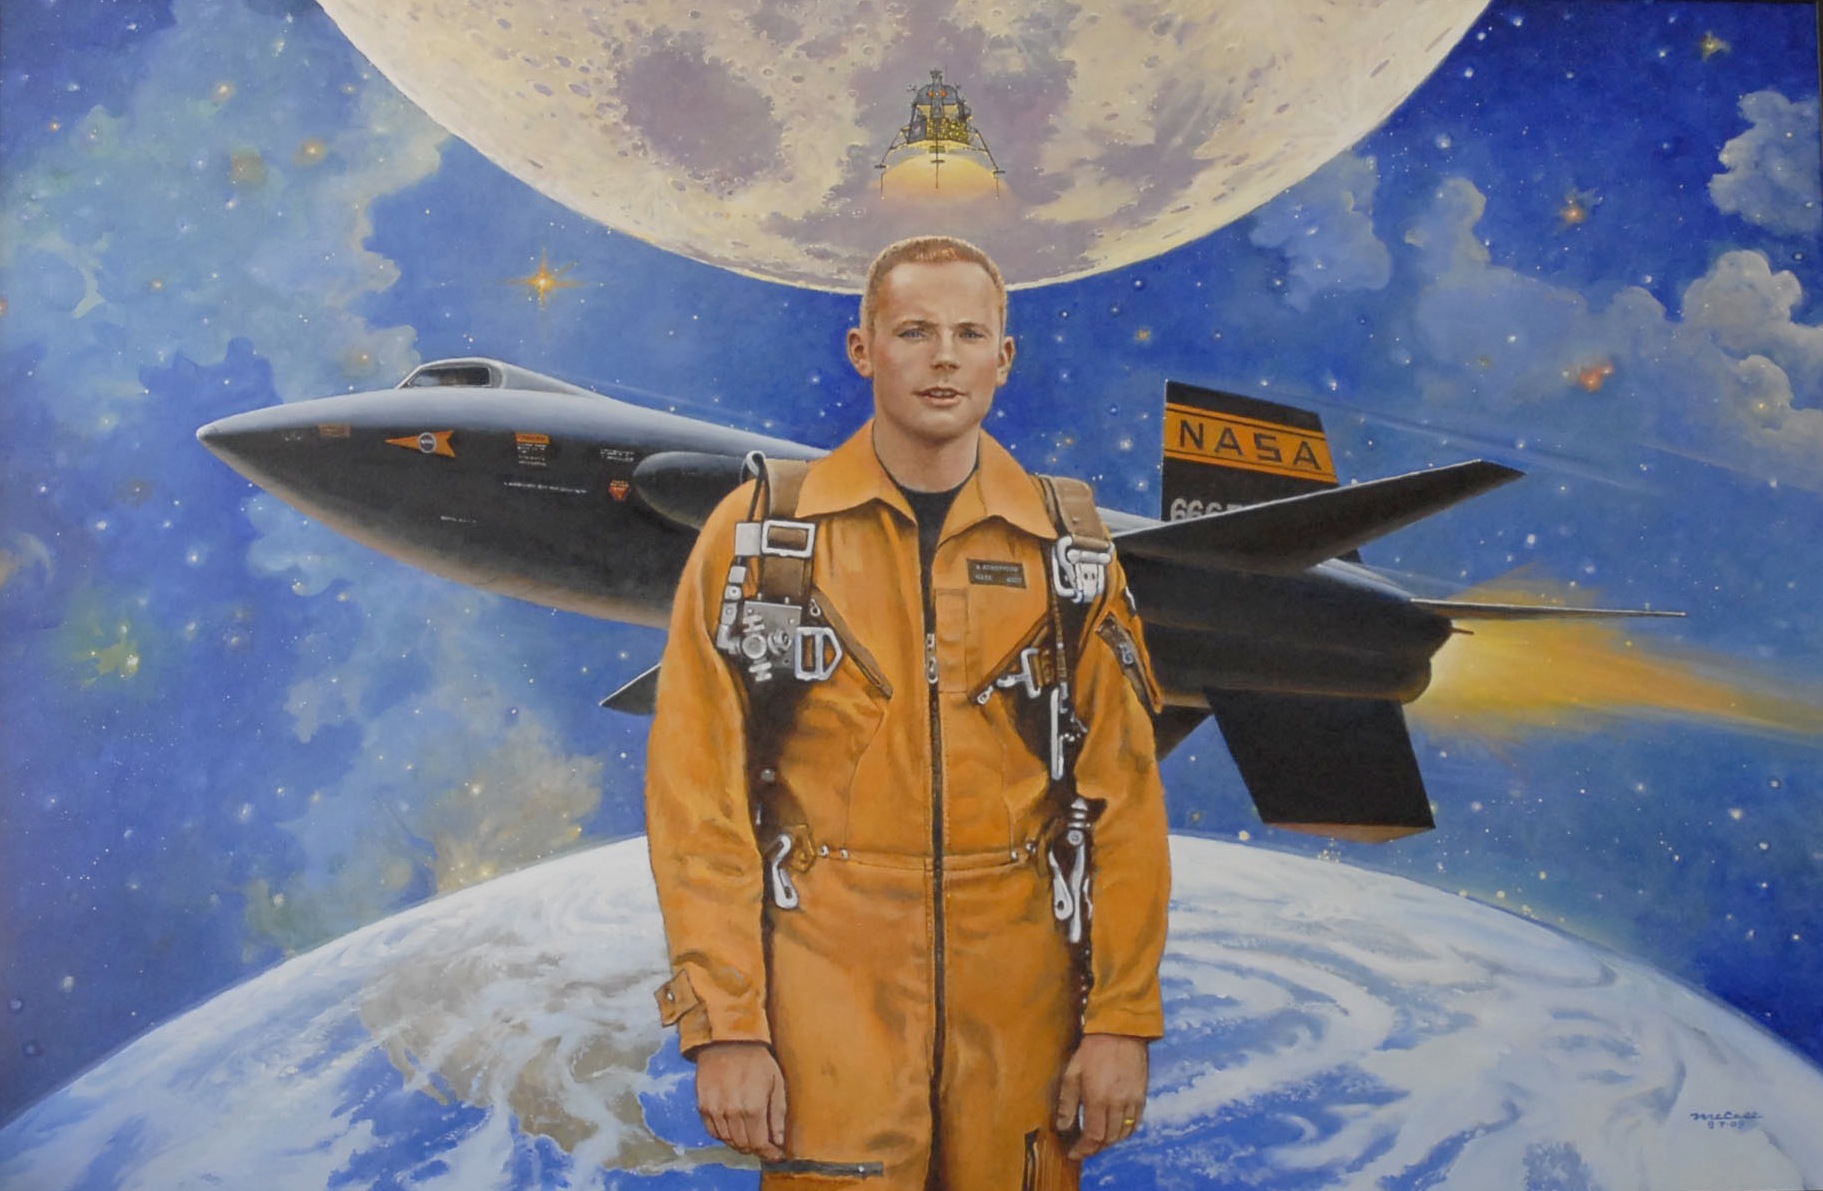 This painting by artist Robert McCall sums up Neil A. Armstrong's achievements in aviation and spaceflight history. NASA Dryden Flight Research Center was renamed after Armstrong, who died in 2012, on Saturday, March 1. Image Credit: NASA (painting by Robert McCall)